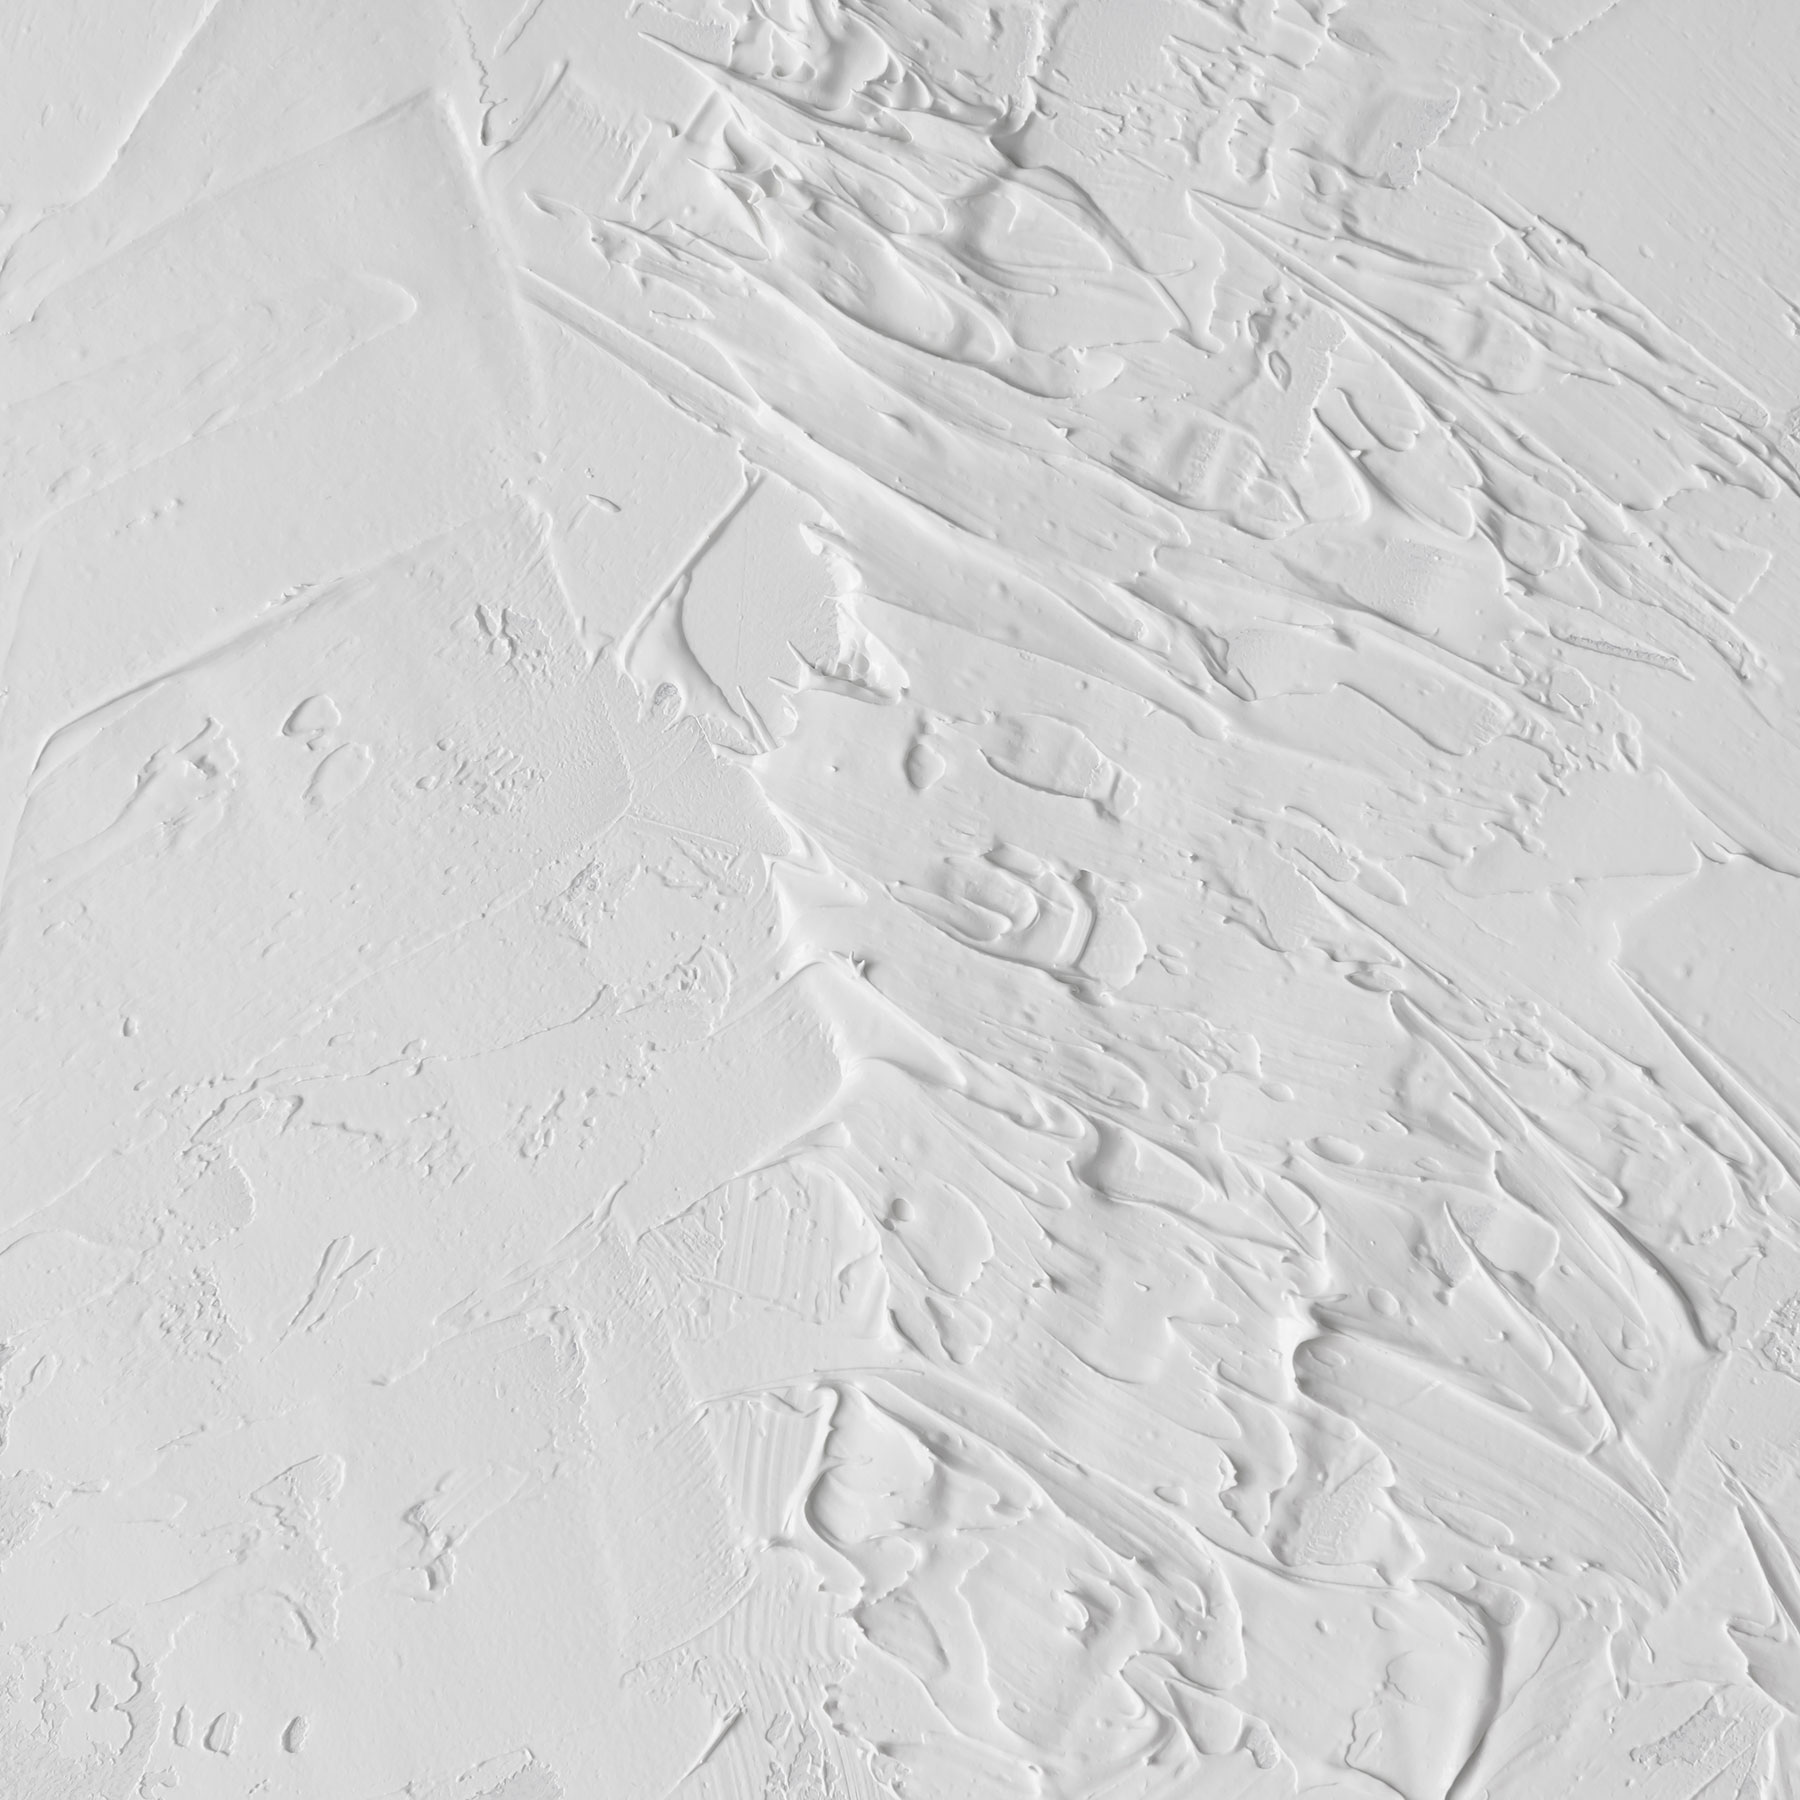 white abstract oil paint texture on canvas or wall AP5S8L6